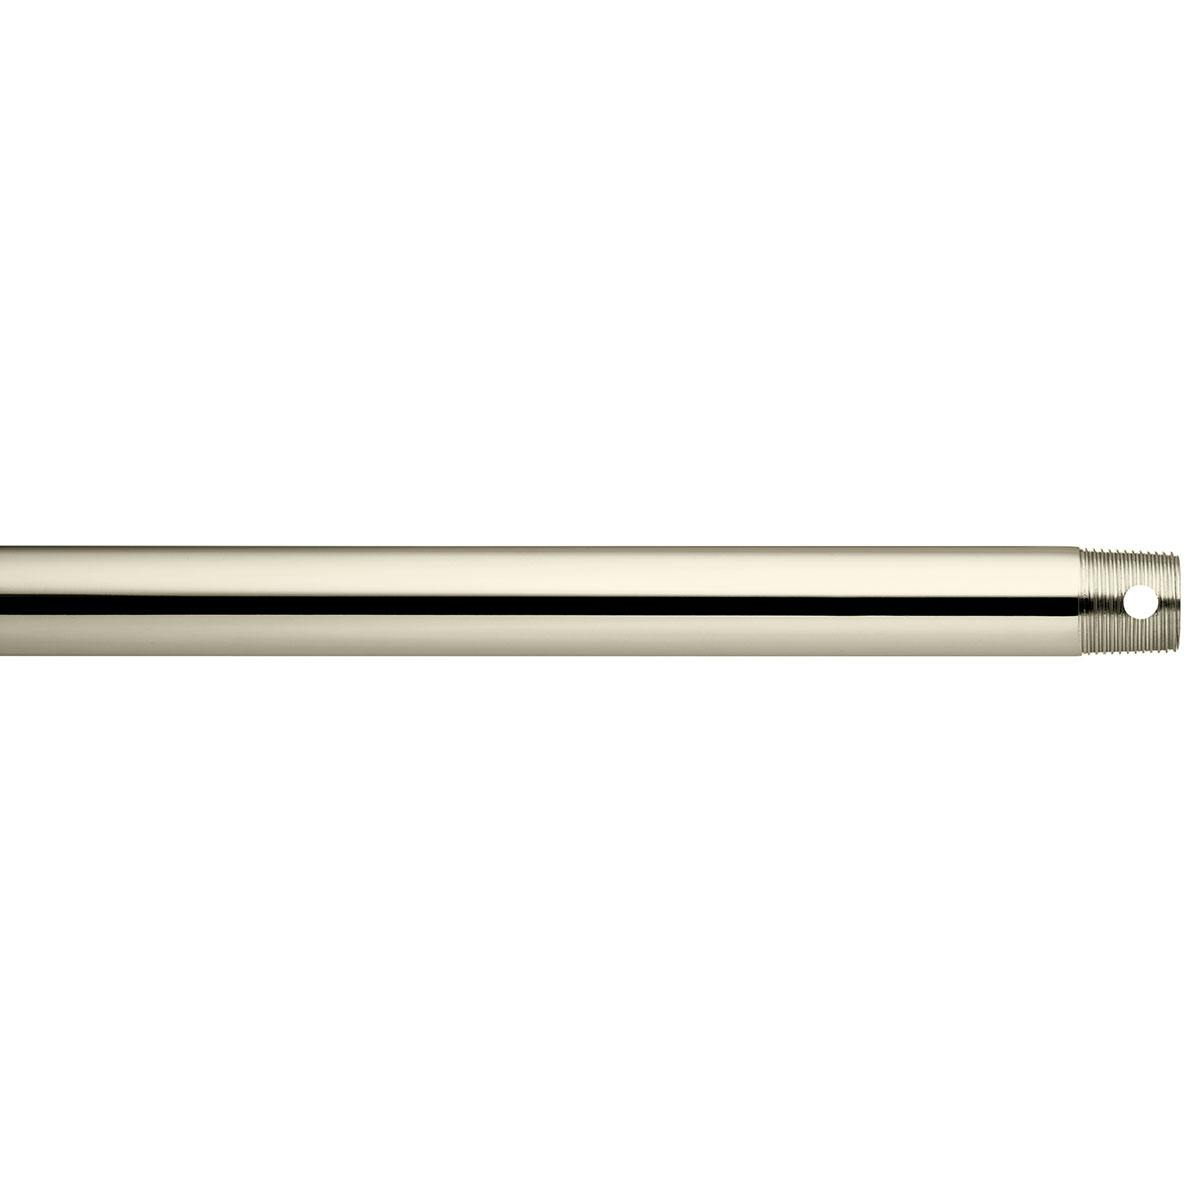 Dual Threaded 48" Downrod Polished Nickel on a white background